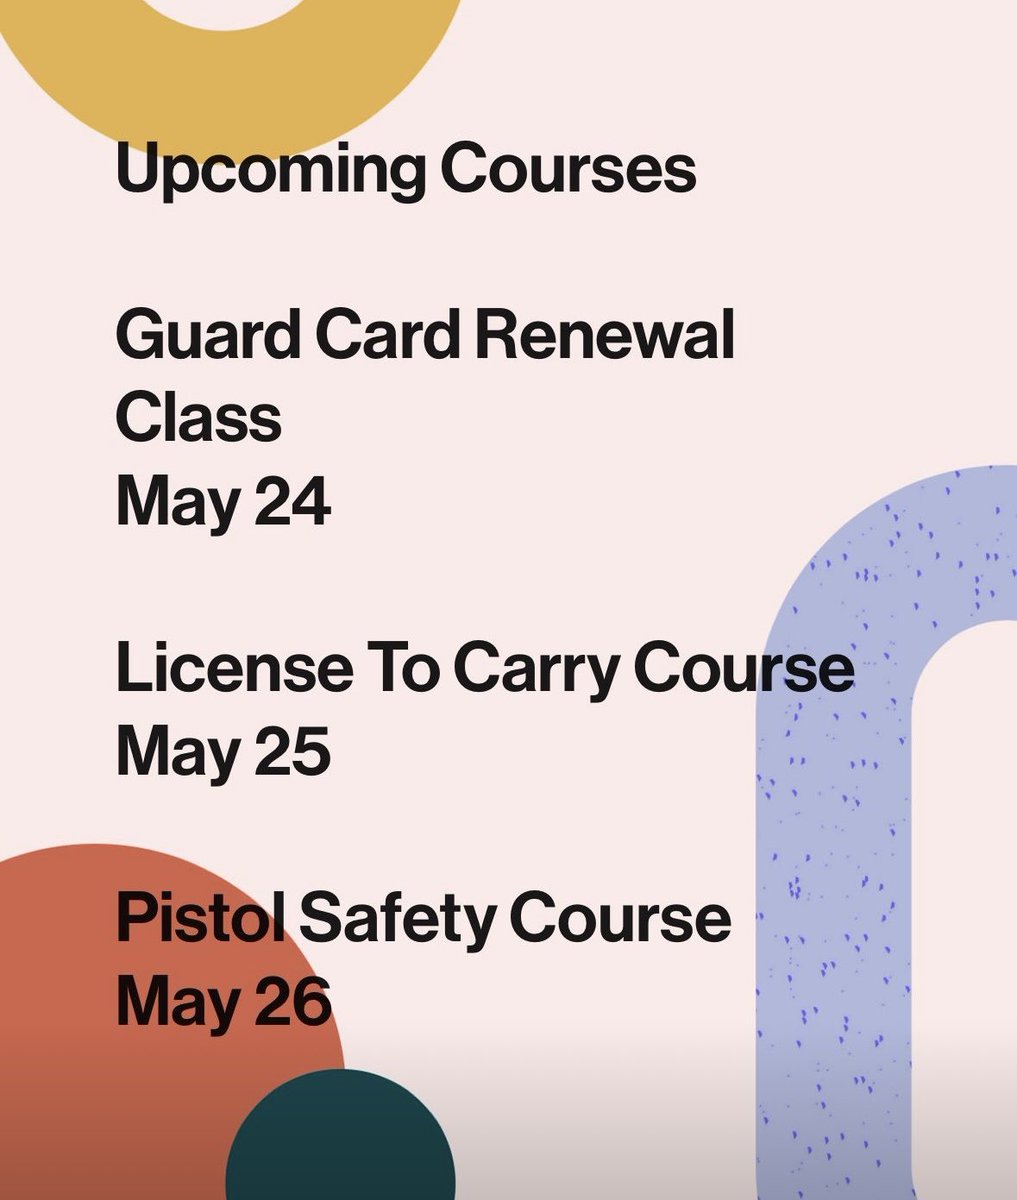 #LTC #hawaii #pistolsafety #licensetocarry #concealedcarry #firearmstraining #firearmsafety #security
#guardcard #guardcardrenewal #5and7tacticalsolutionsllc